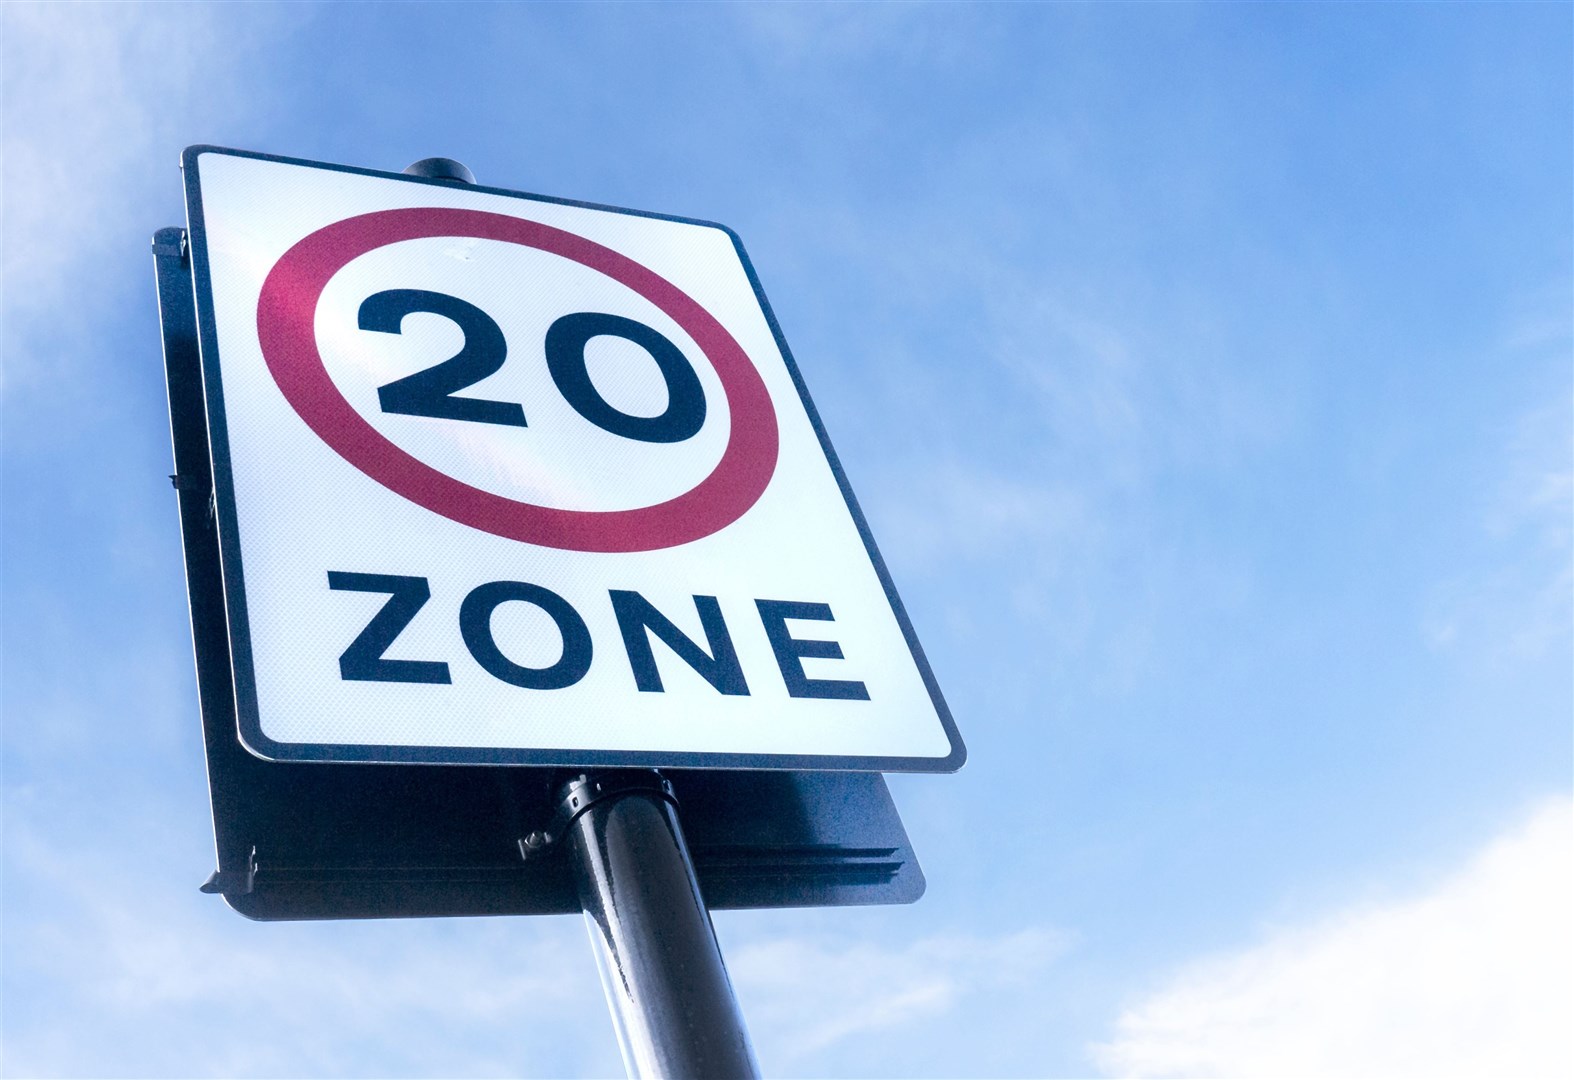 Highland Council will make final decisions on 20mph zones in the strathy towards the end of this year or early in 2025.